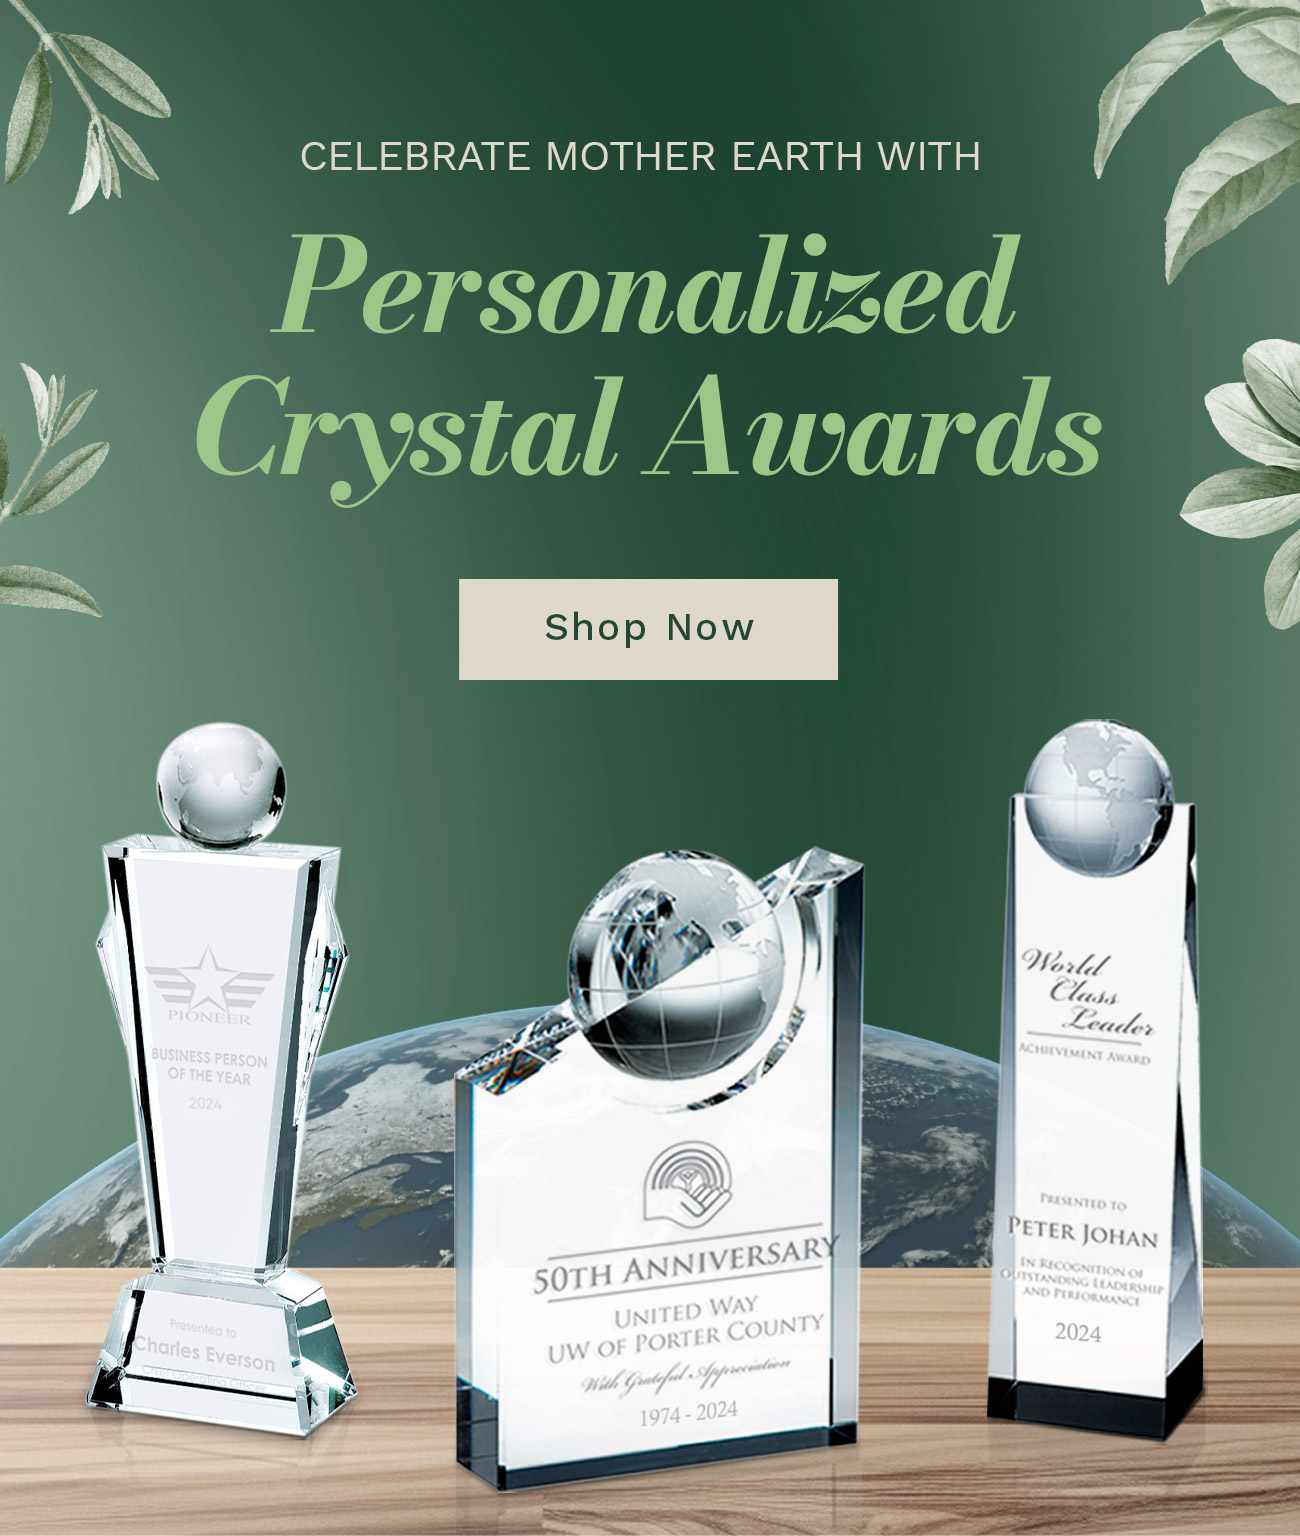 Celebrate Mother Earth with Personalized Crystal Awards. Shop Now.